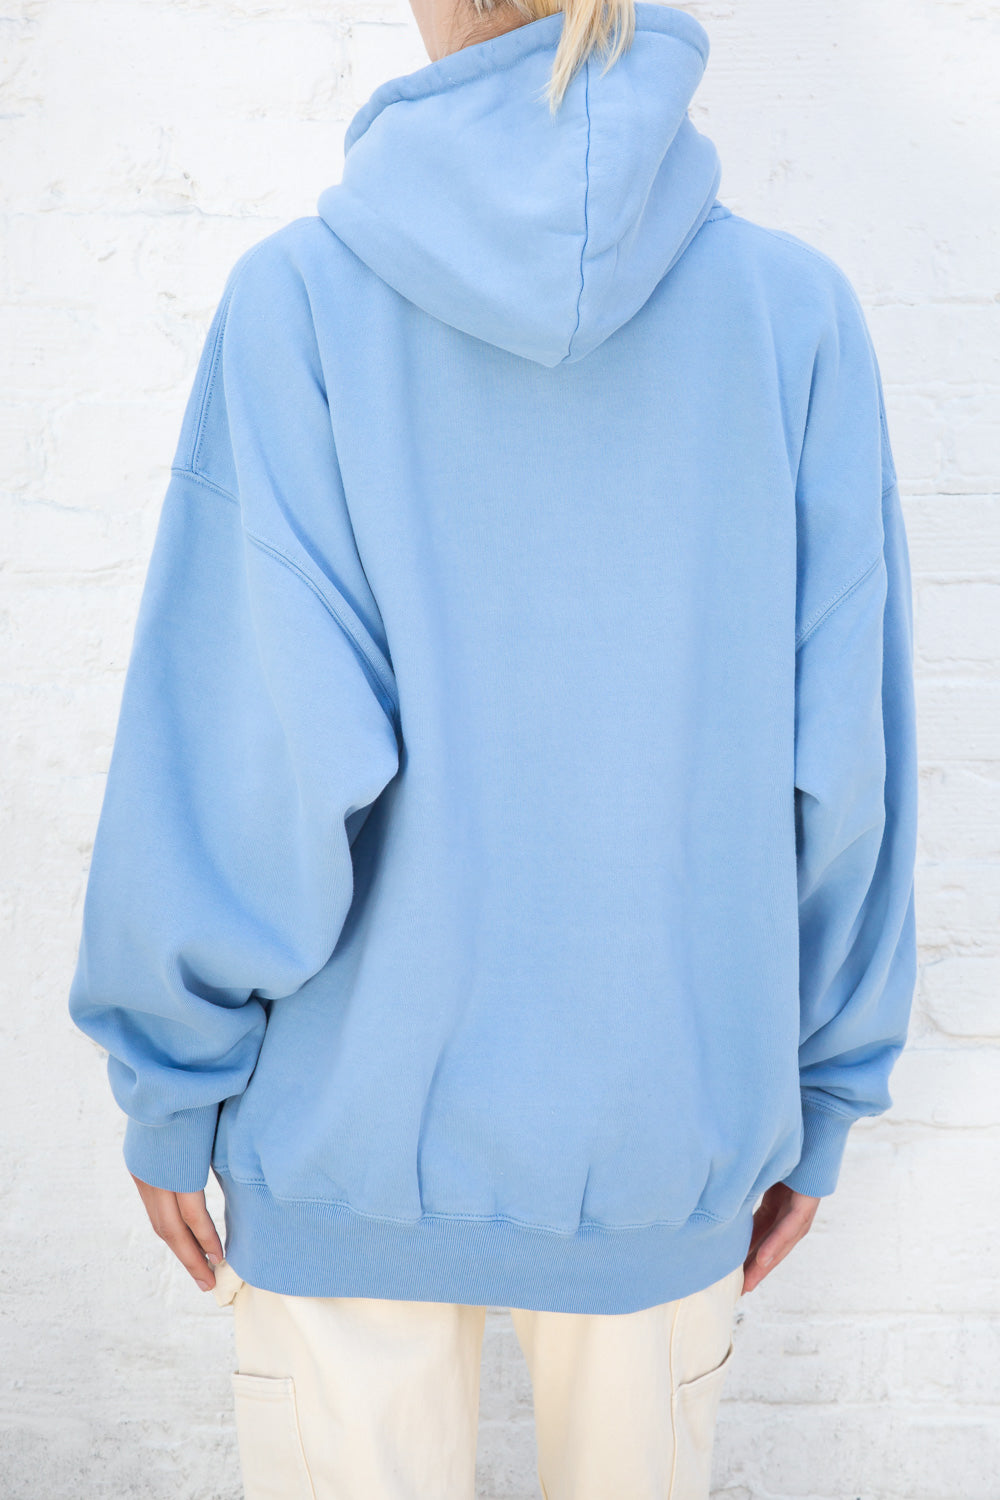 Bright Blue / Oversized Fit